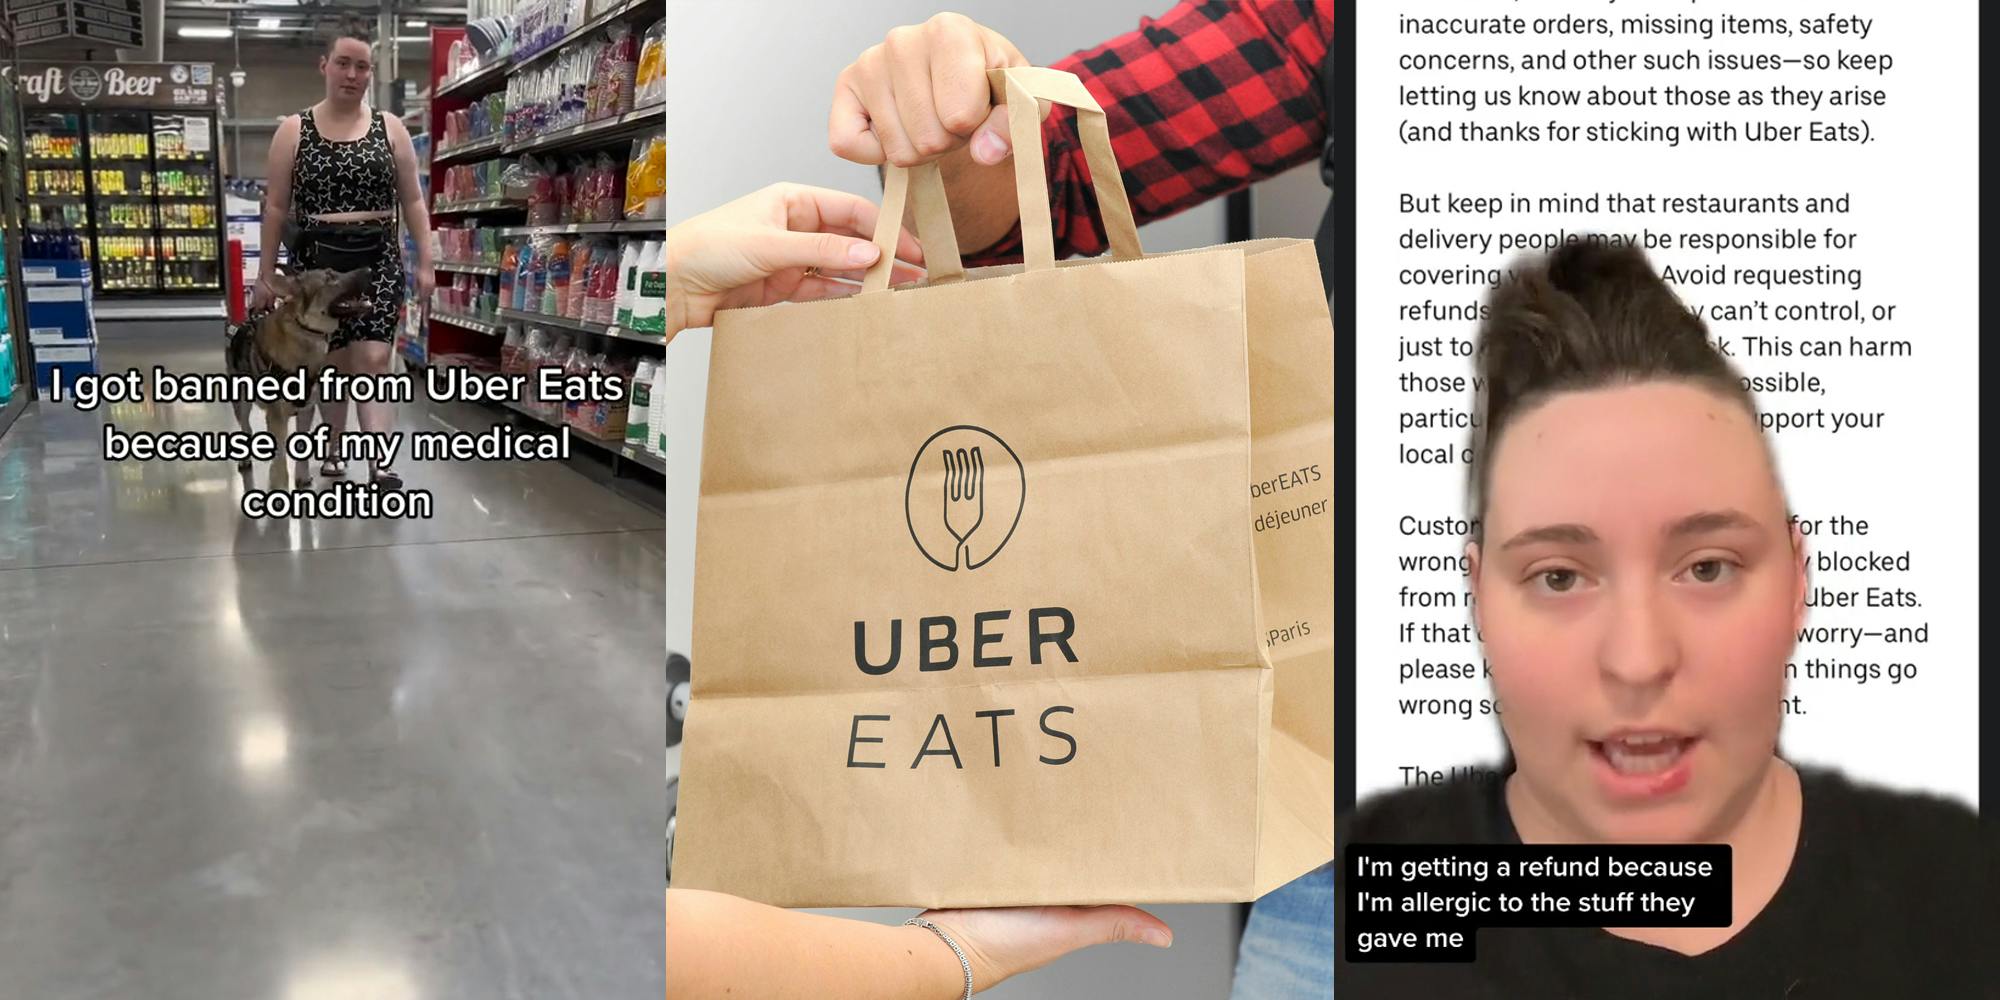 Uber Eats customer walking in store with dog with caption "I got banned form Uber Eats because of my medical condition" (l) Uber Eats bag in hands (c) Uber Eats customer greenscreen TikTok over email with caption "I'm getting a refund because I'm allergic to the stuff they gave me" (r)